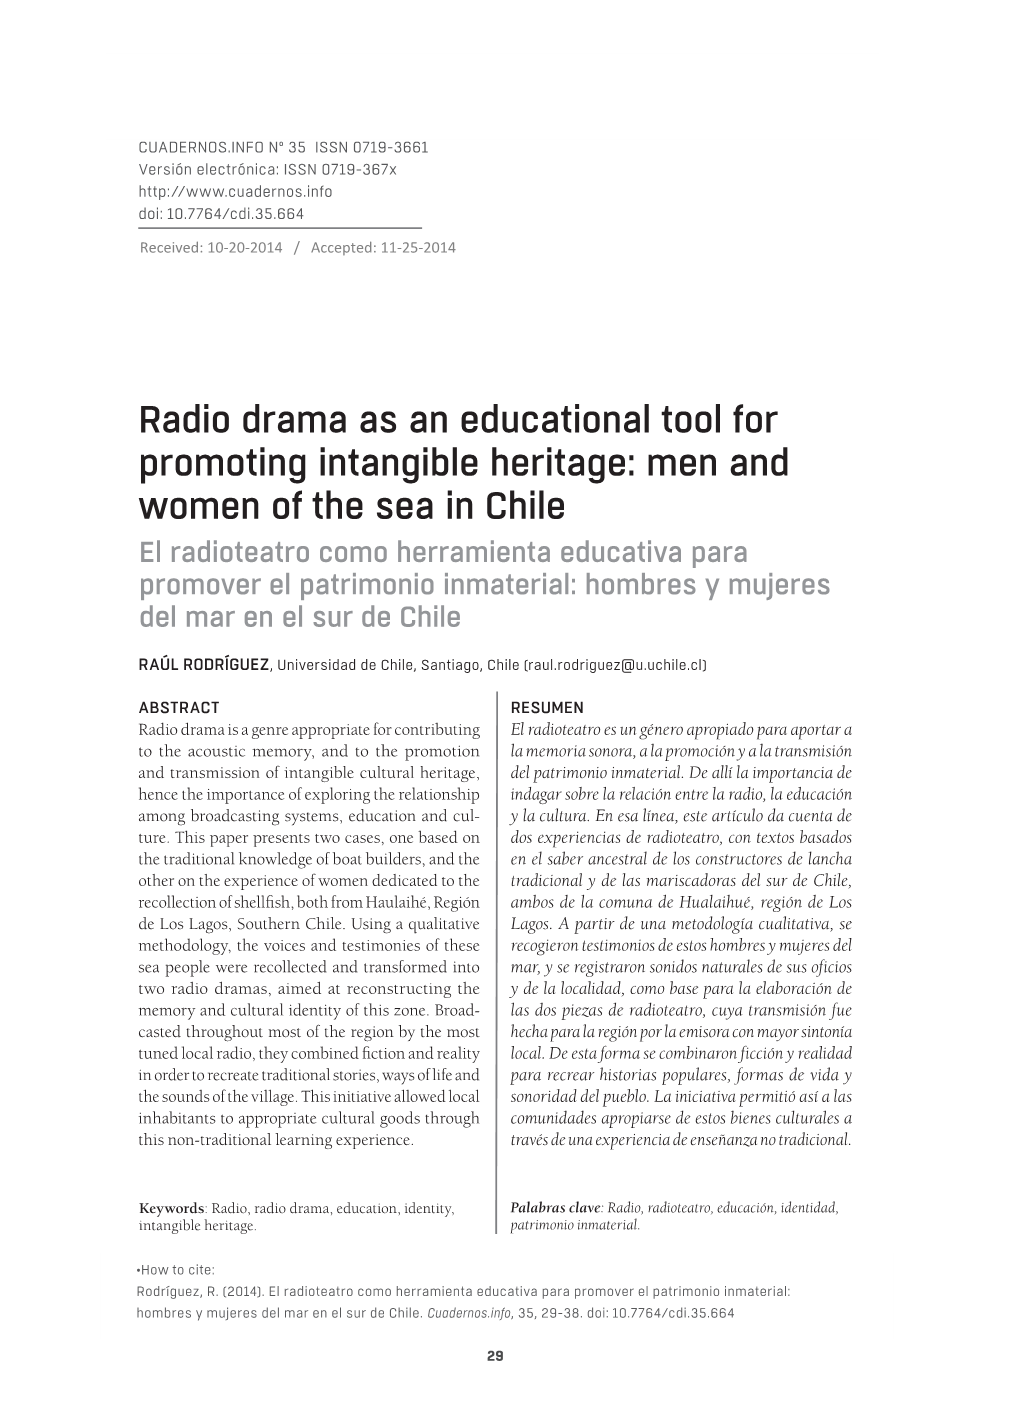 Radio Drama As an Educational Tool for Promoting Intangible Heritage